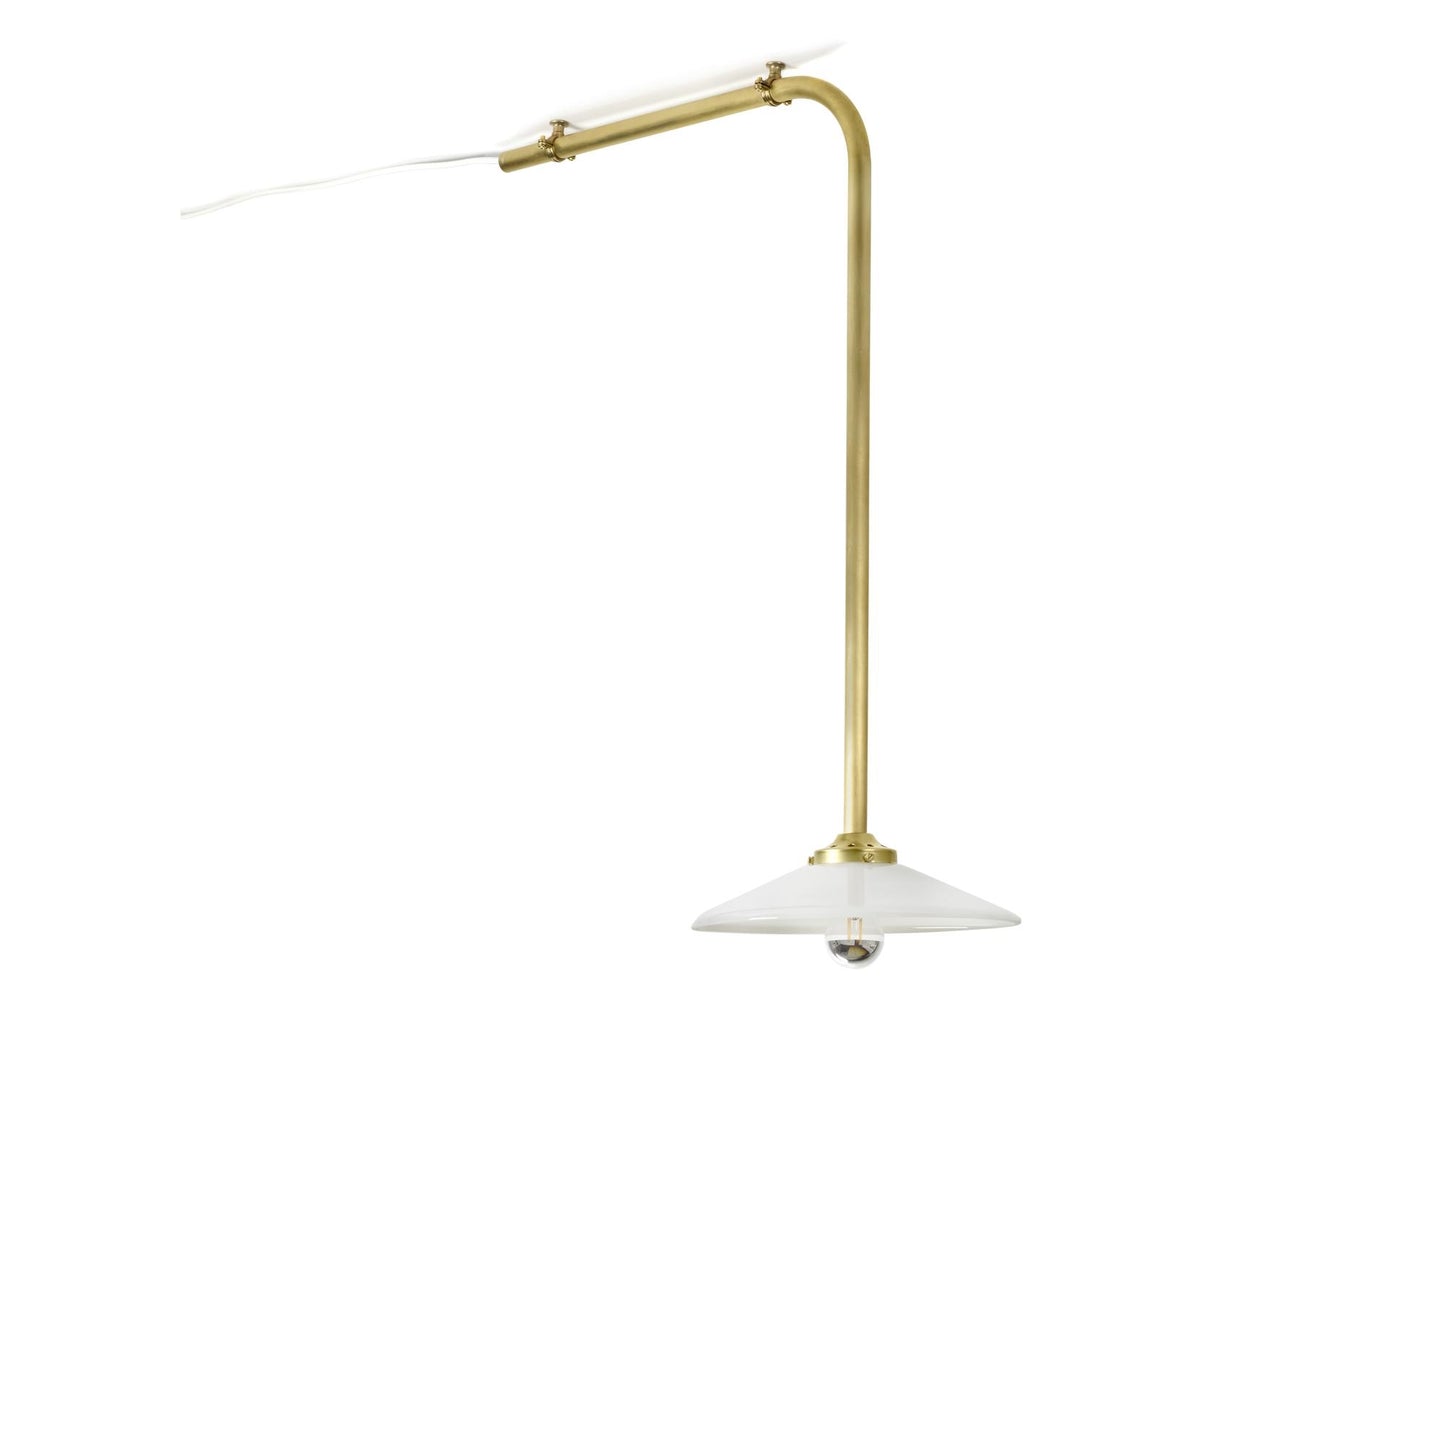 Ceiling Lamp N°3 Ceiling Light by Valerie Objects #Brass